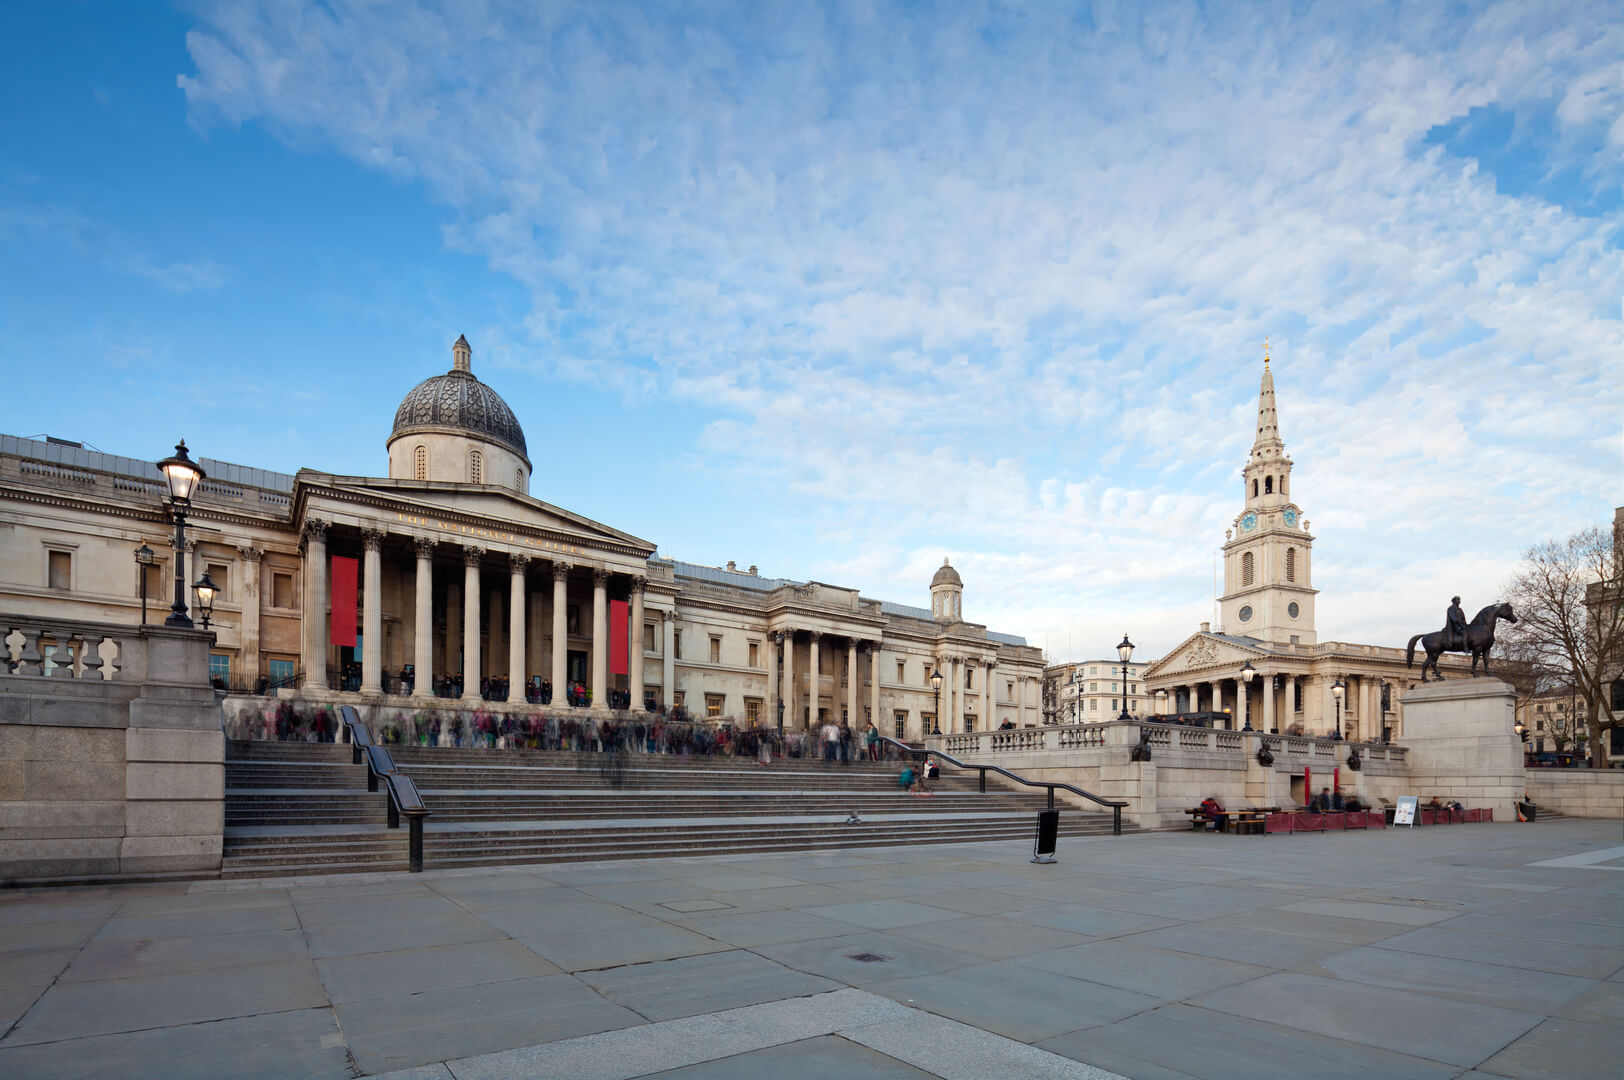 London's National Gallery and St Martin-in-the-Fields, Anglican church. Cityscape shot with tilt-shift lens maintaining verticals